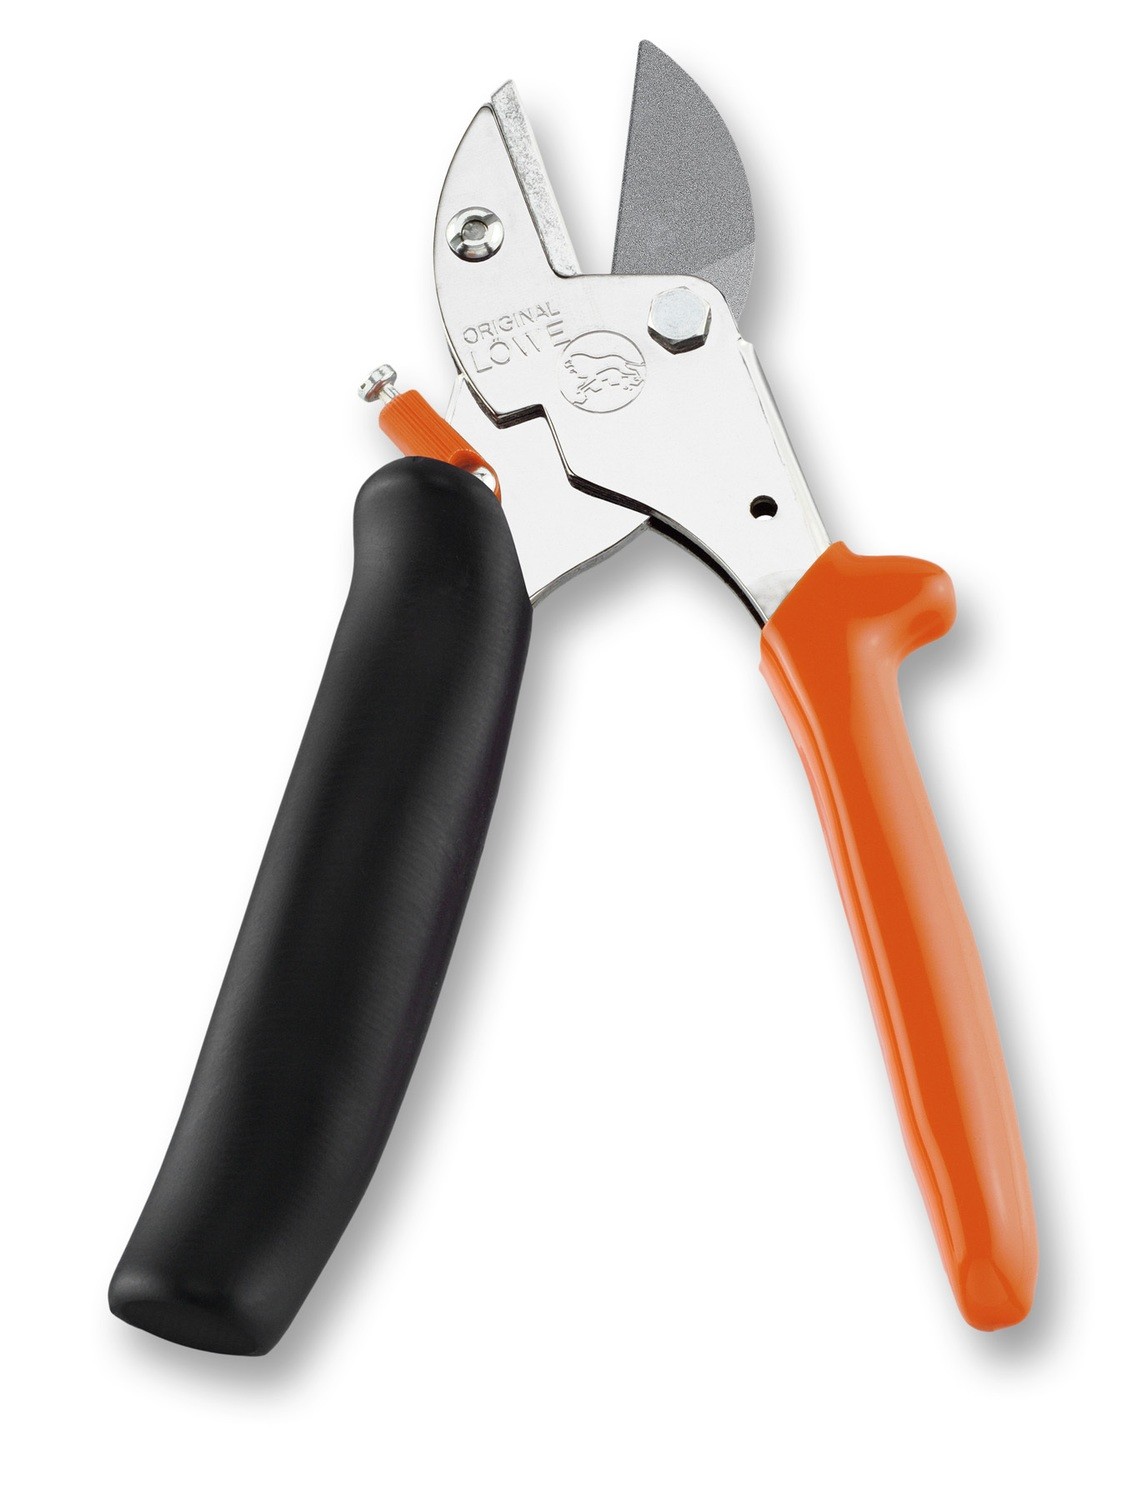 LÖWE 5.109 Small anvil pruner with rotating handle